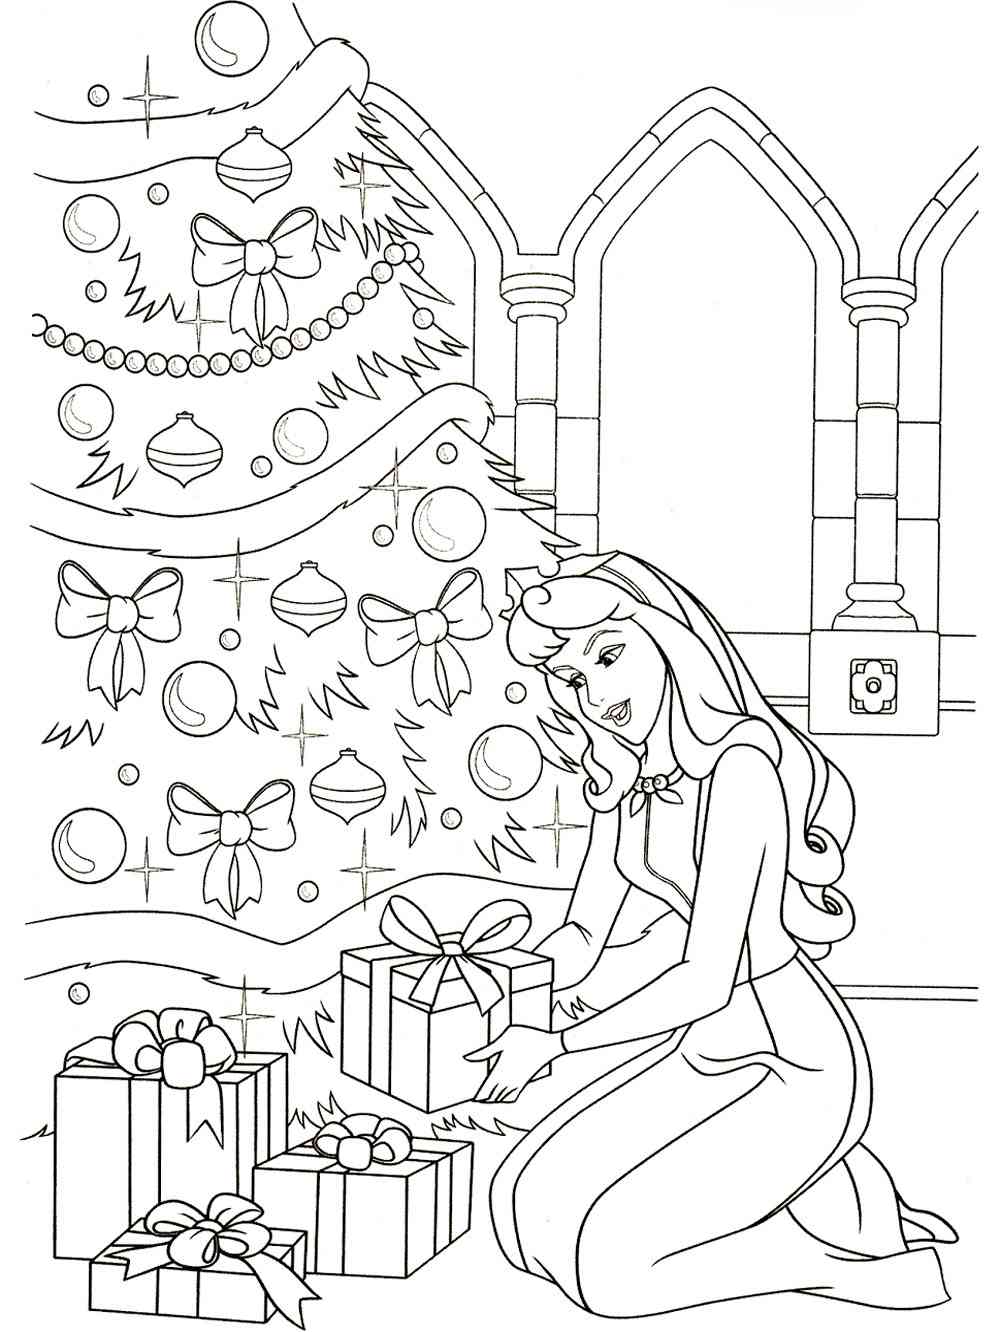 Disney Christmas 14 coloring page